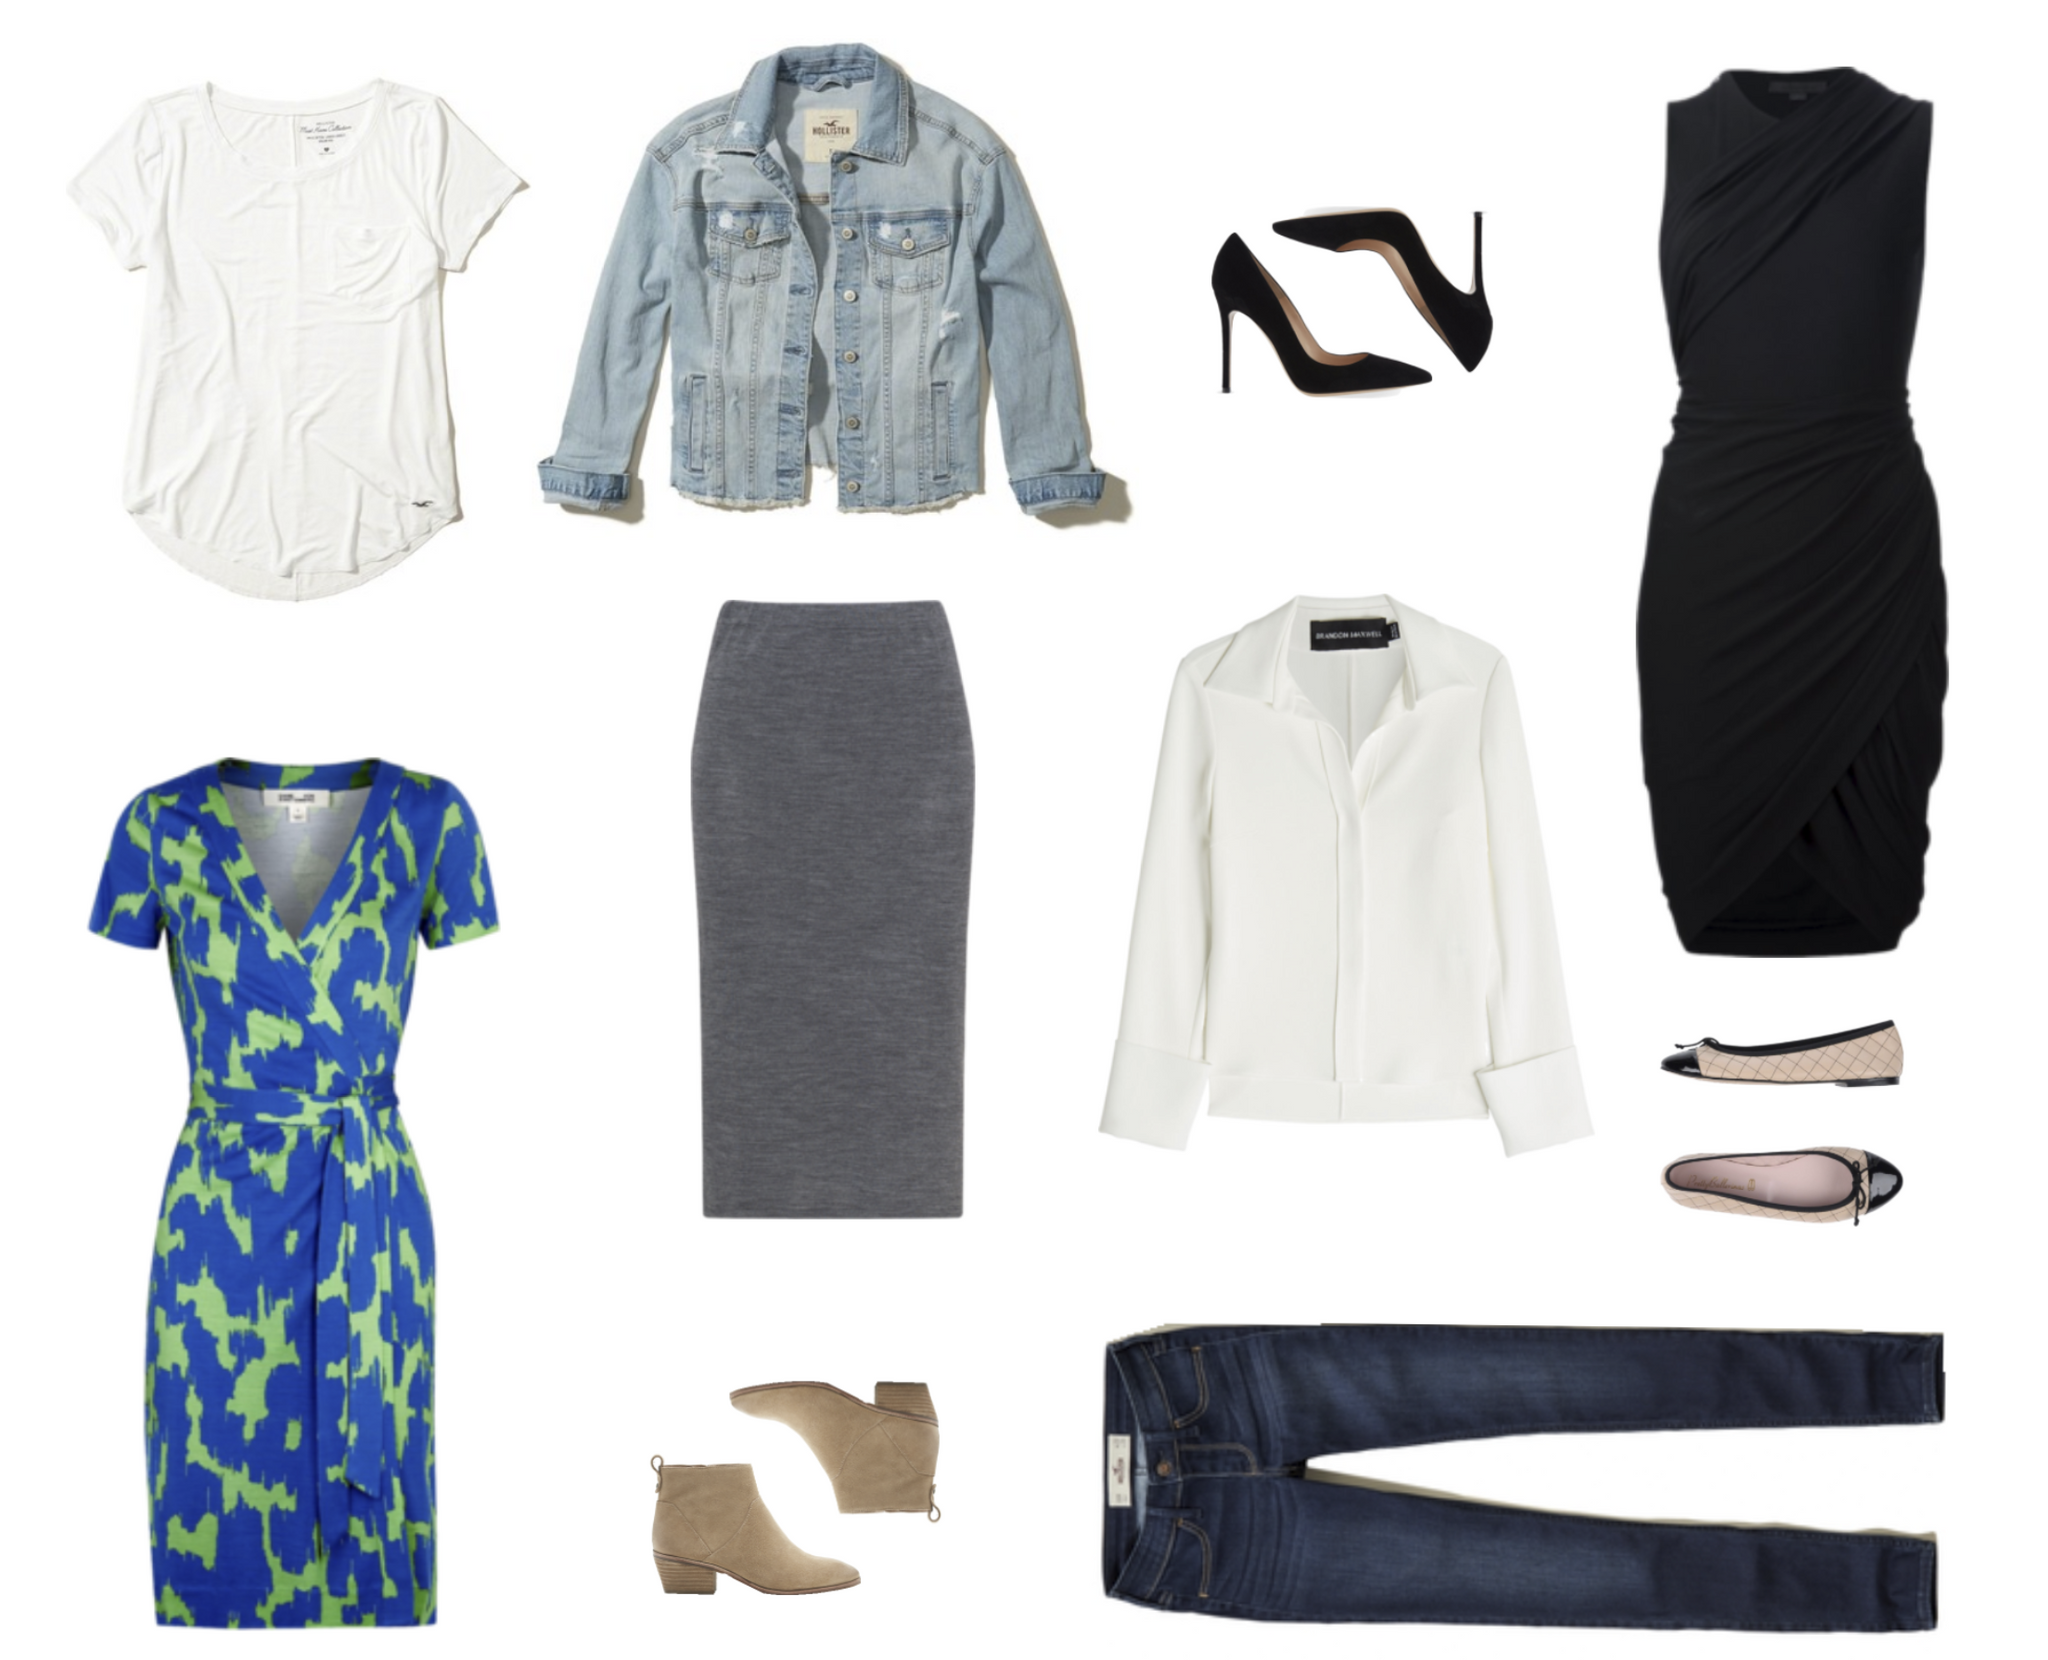 10 Essential Pieces You Need For Your Wardrobe